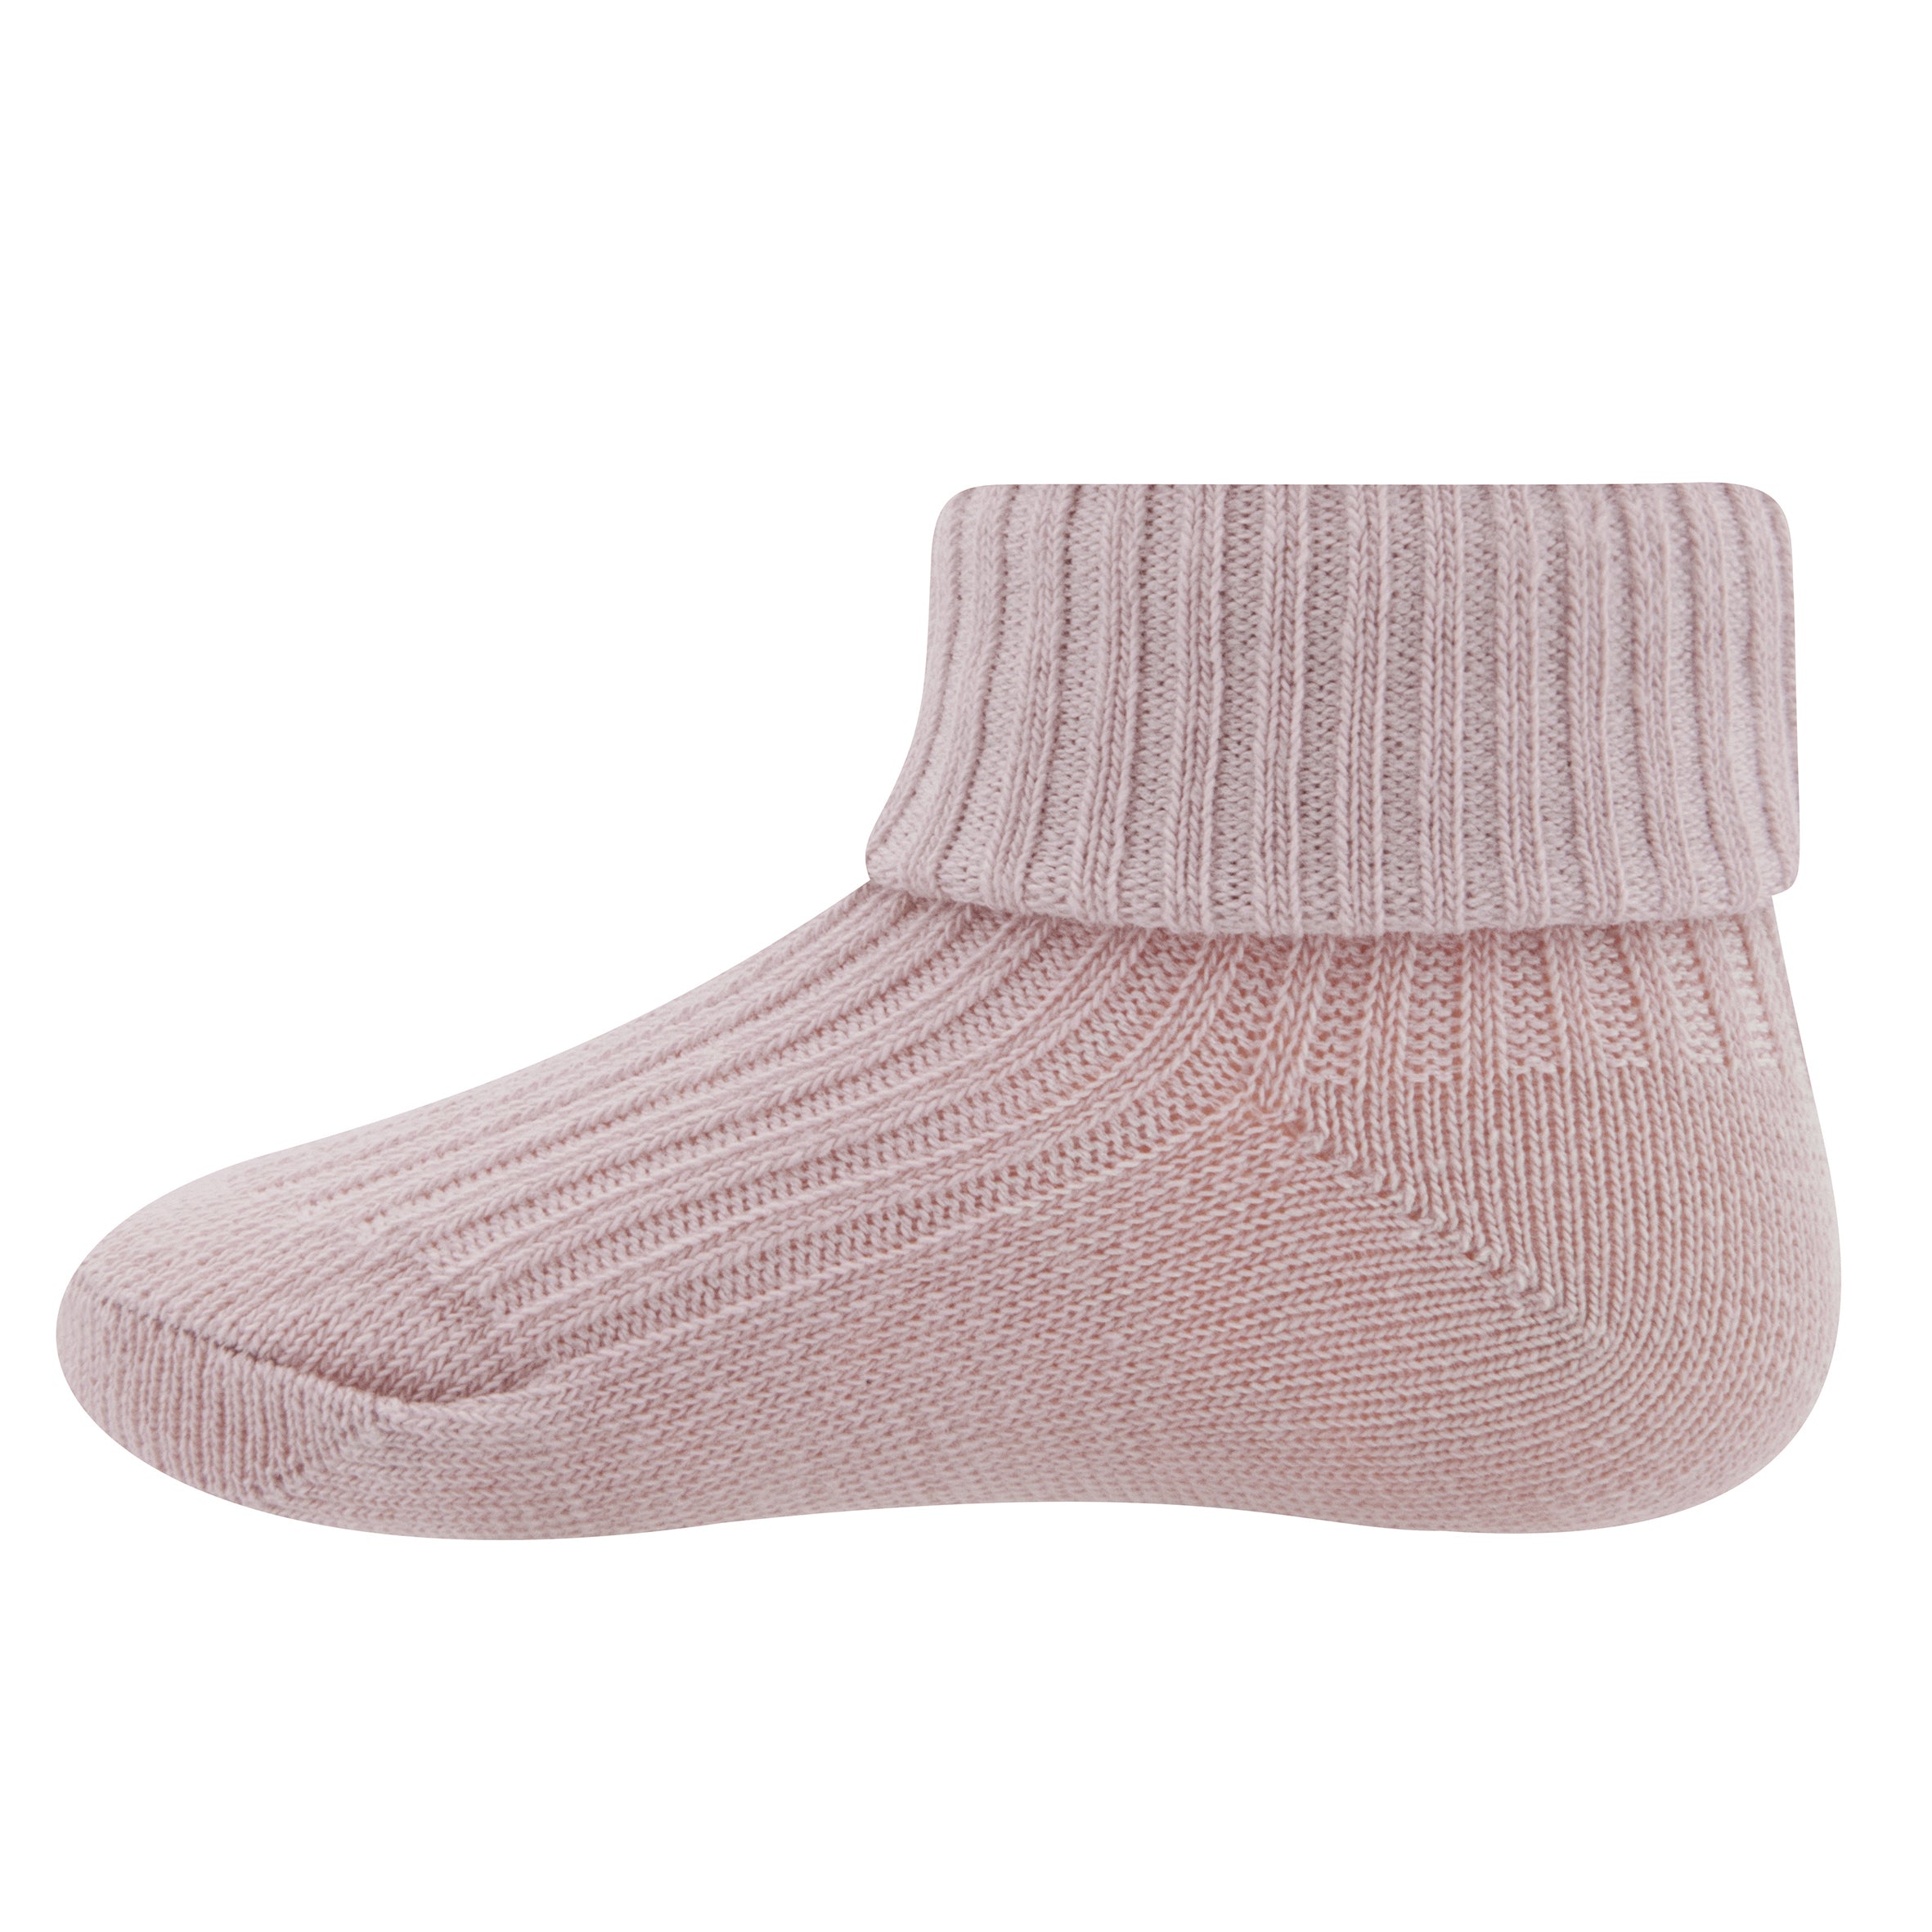 Ewers Baby socks with cover liver